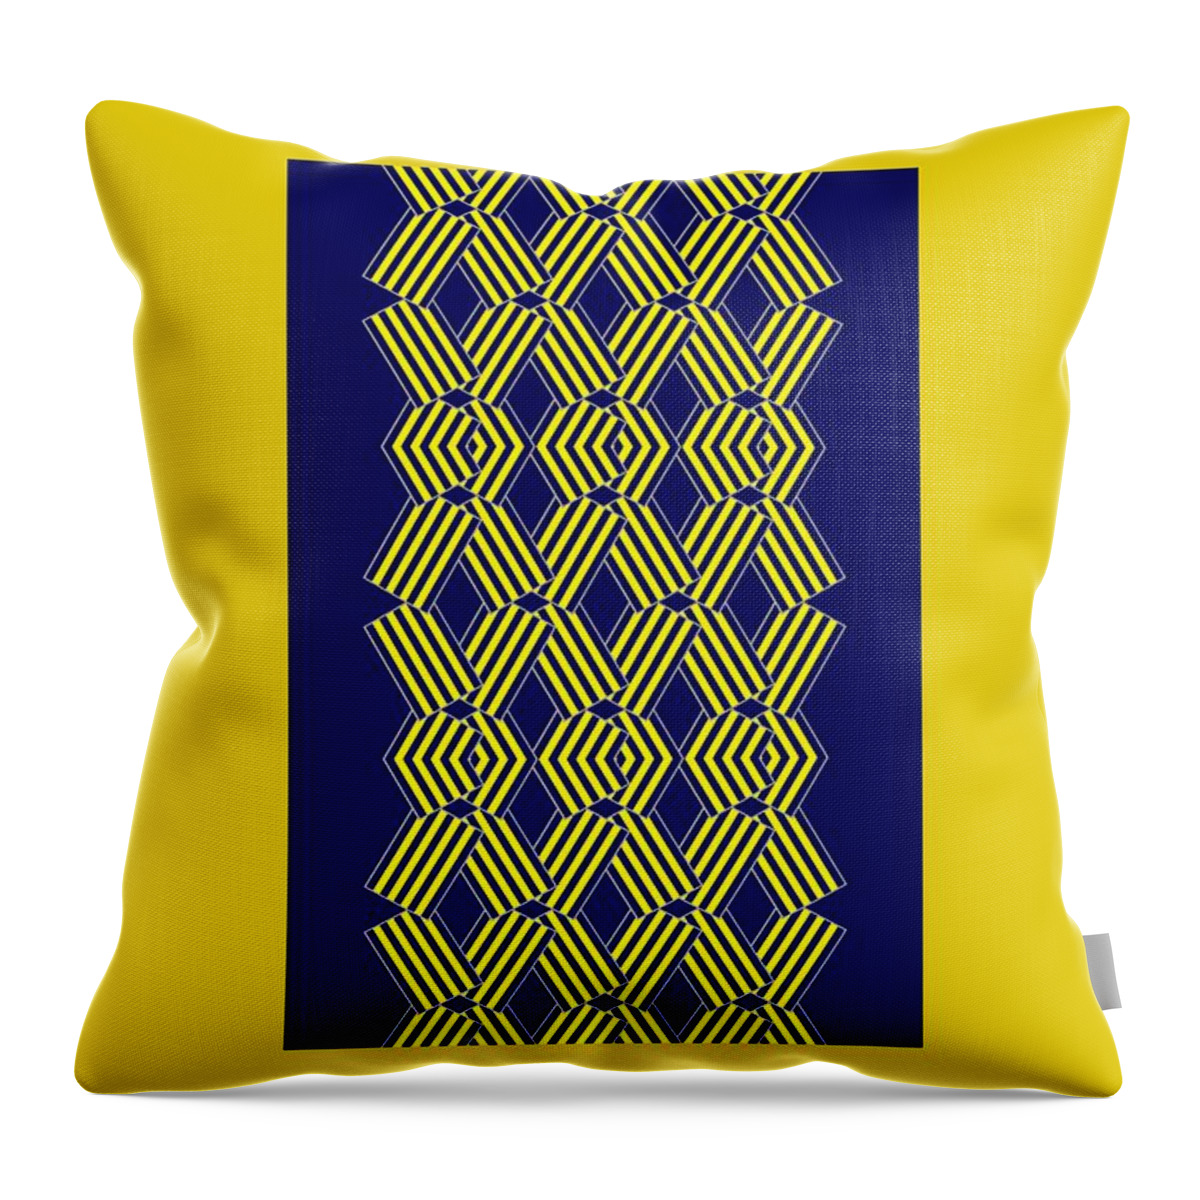 Conspicuous-no1 Throw Pillow featuring the digital art Conspicuous-no1 by Darla Wood